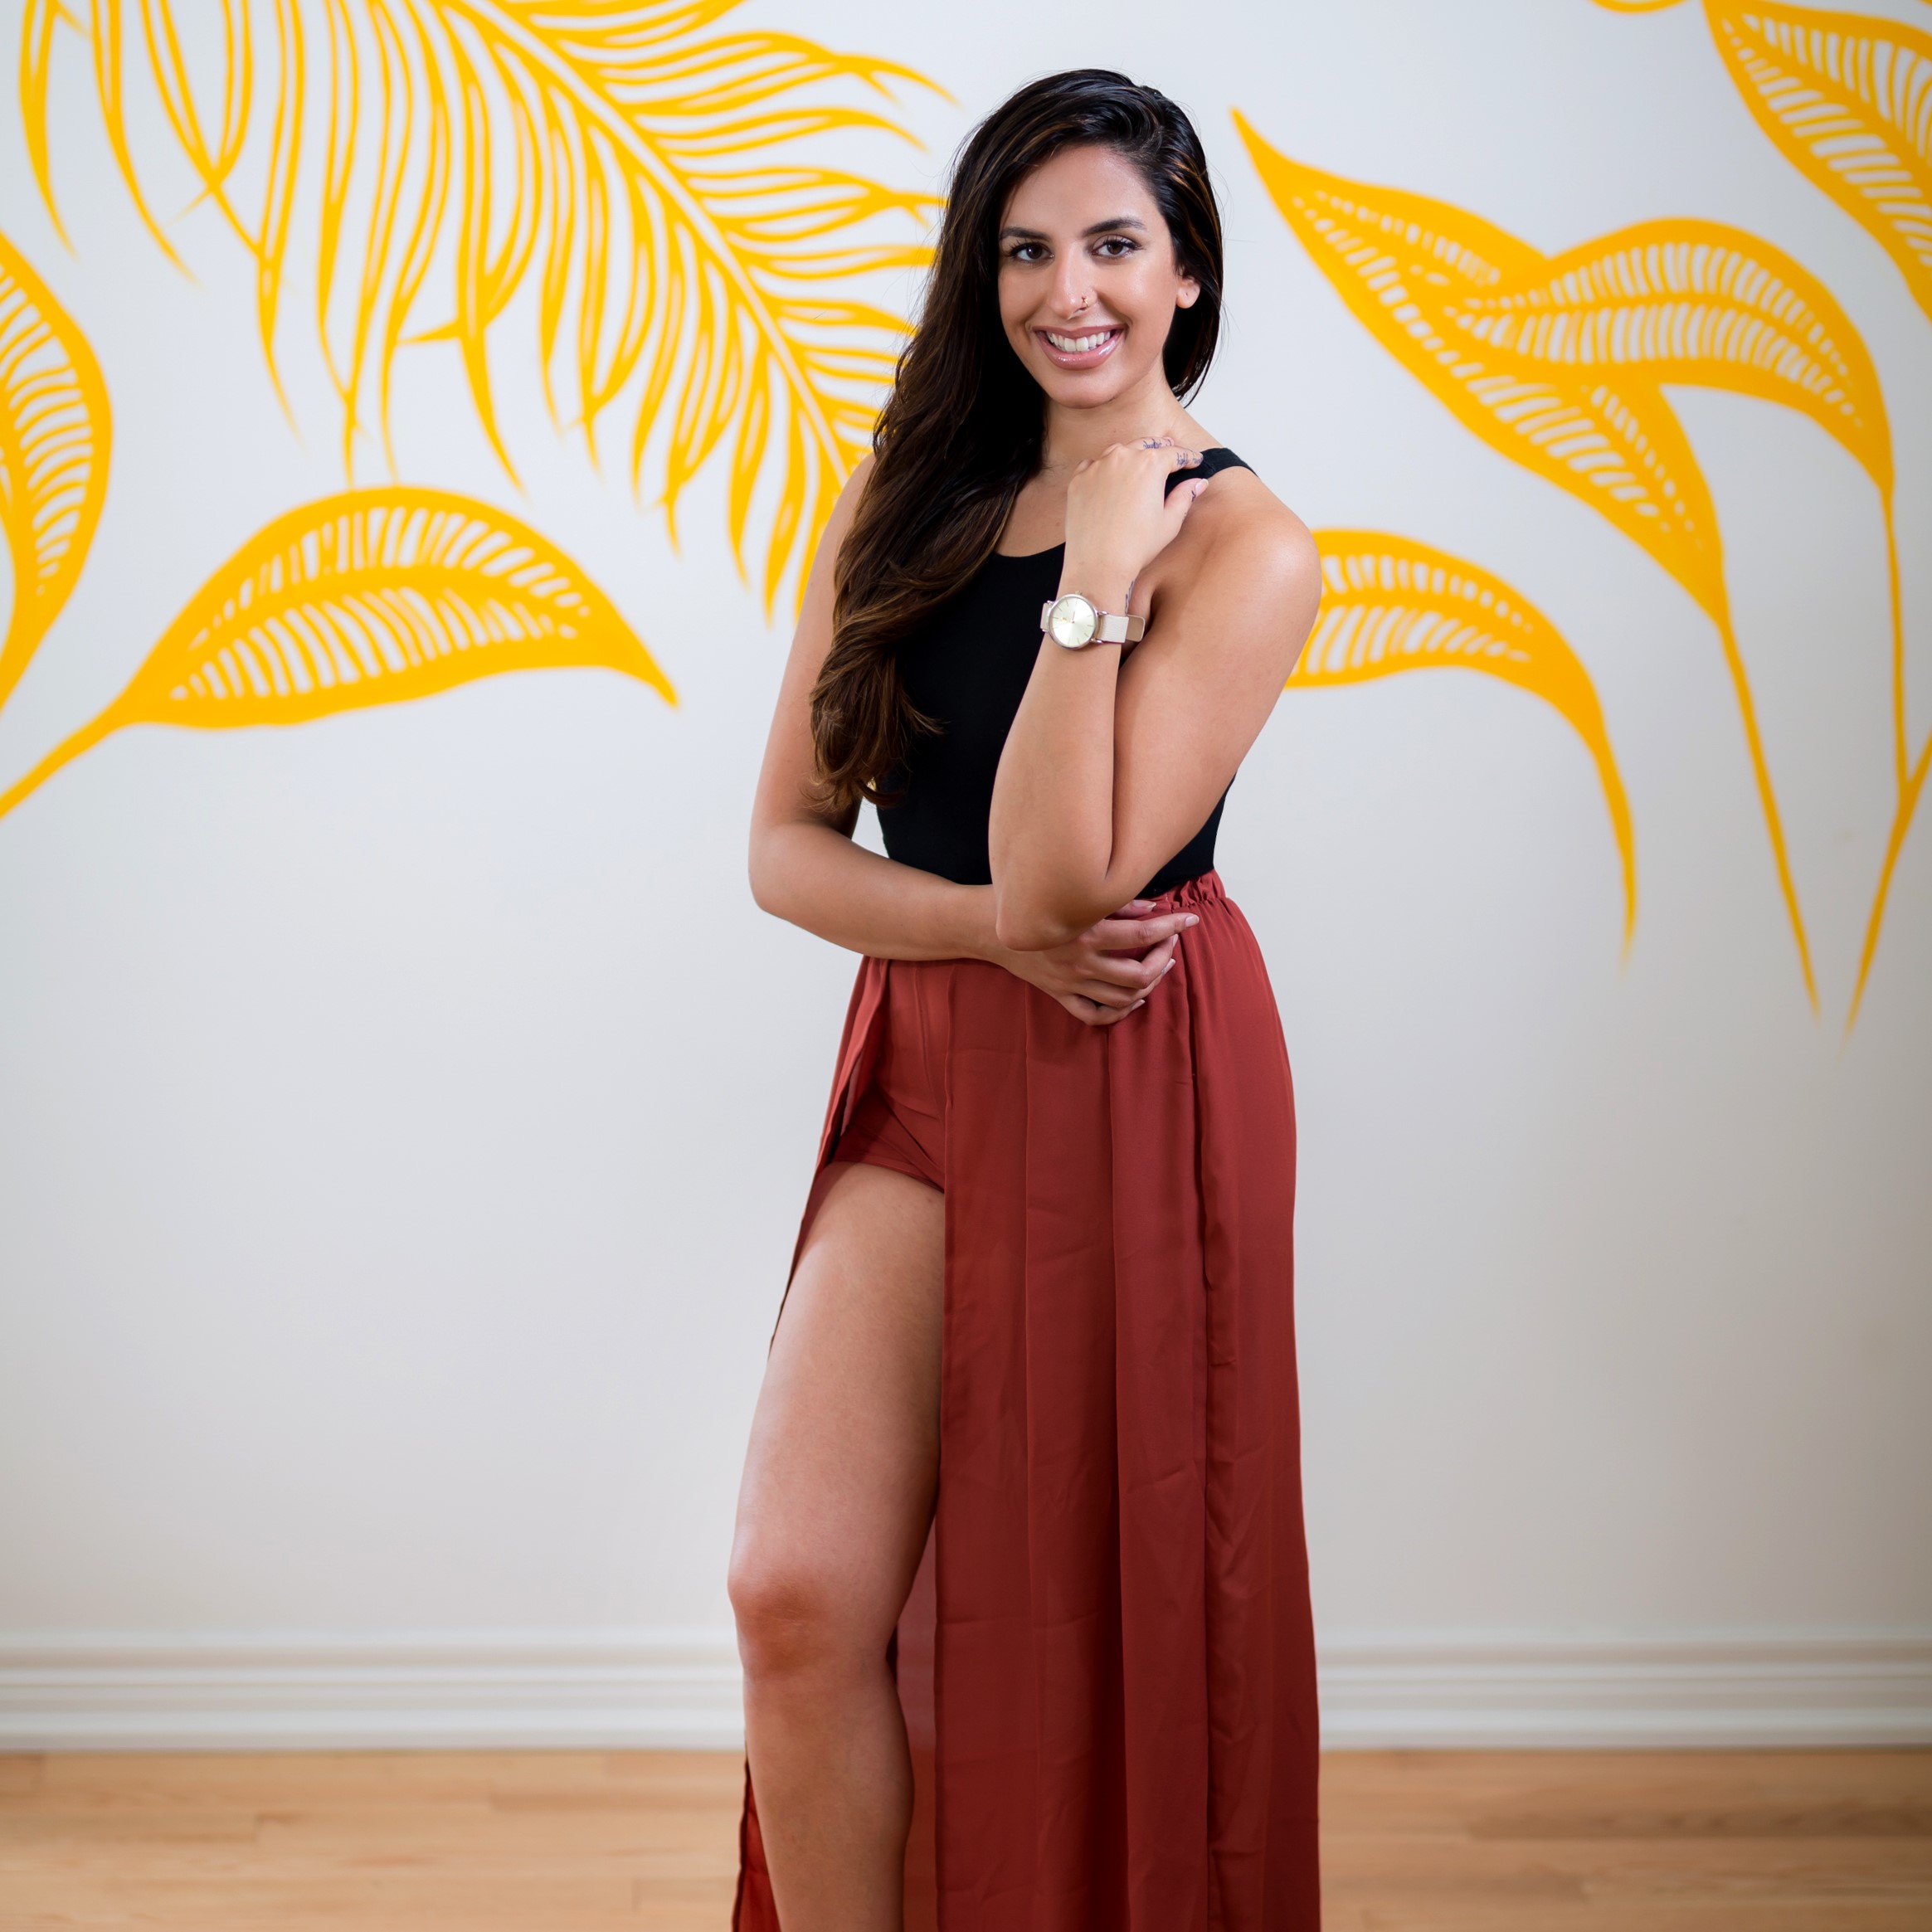 Business artist Jasmin Pannu posing for a professional photo